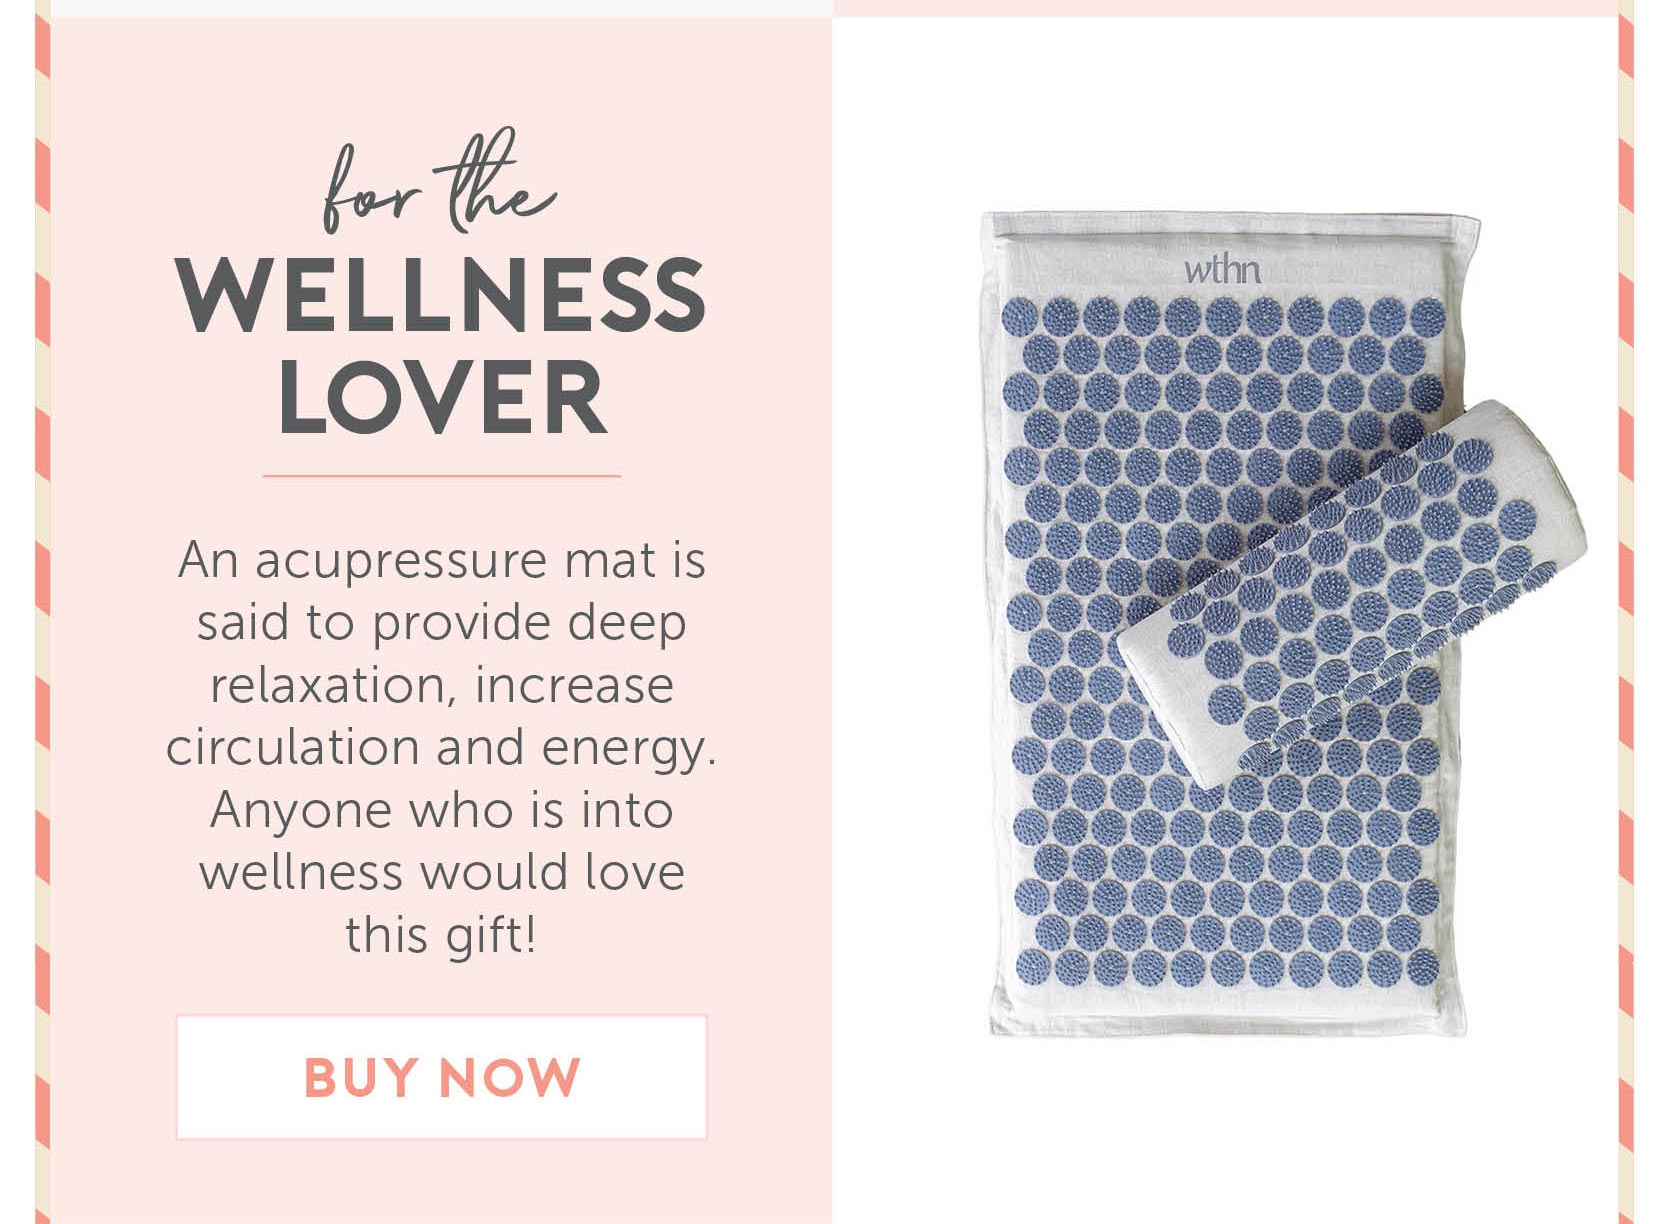 For The Wellness Lover - An acupressure mat is said to provide deep relaxation, increase circulation and energy. Anyone who is into wellness would love this gift!